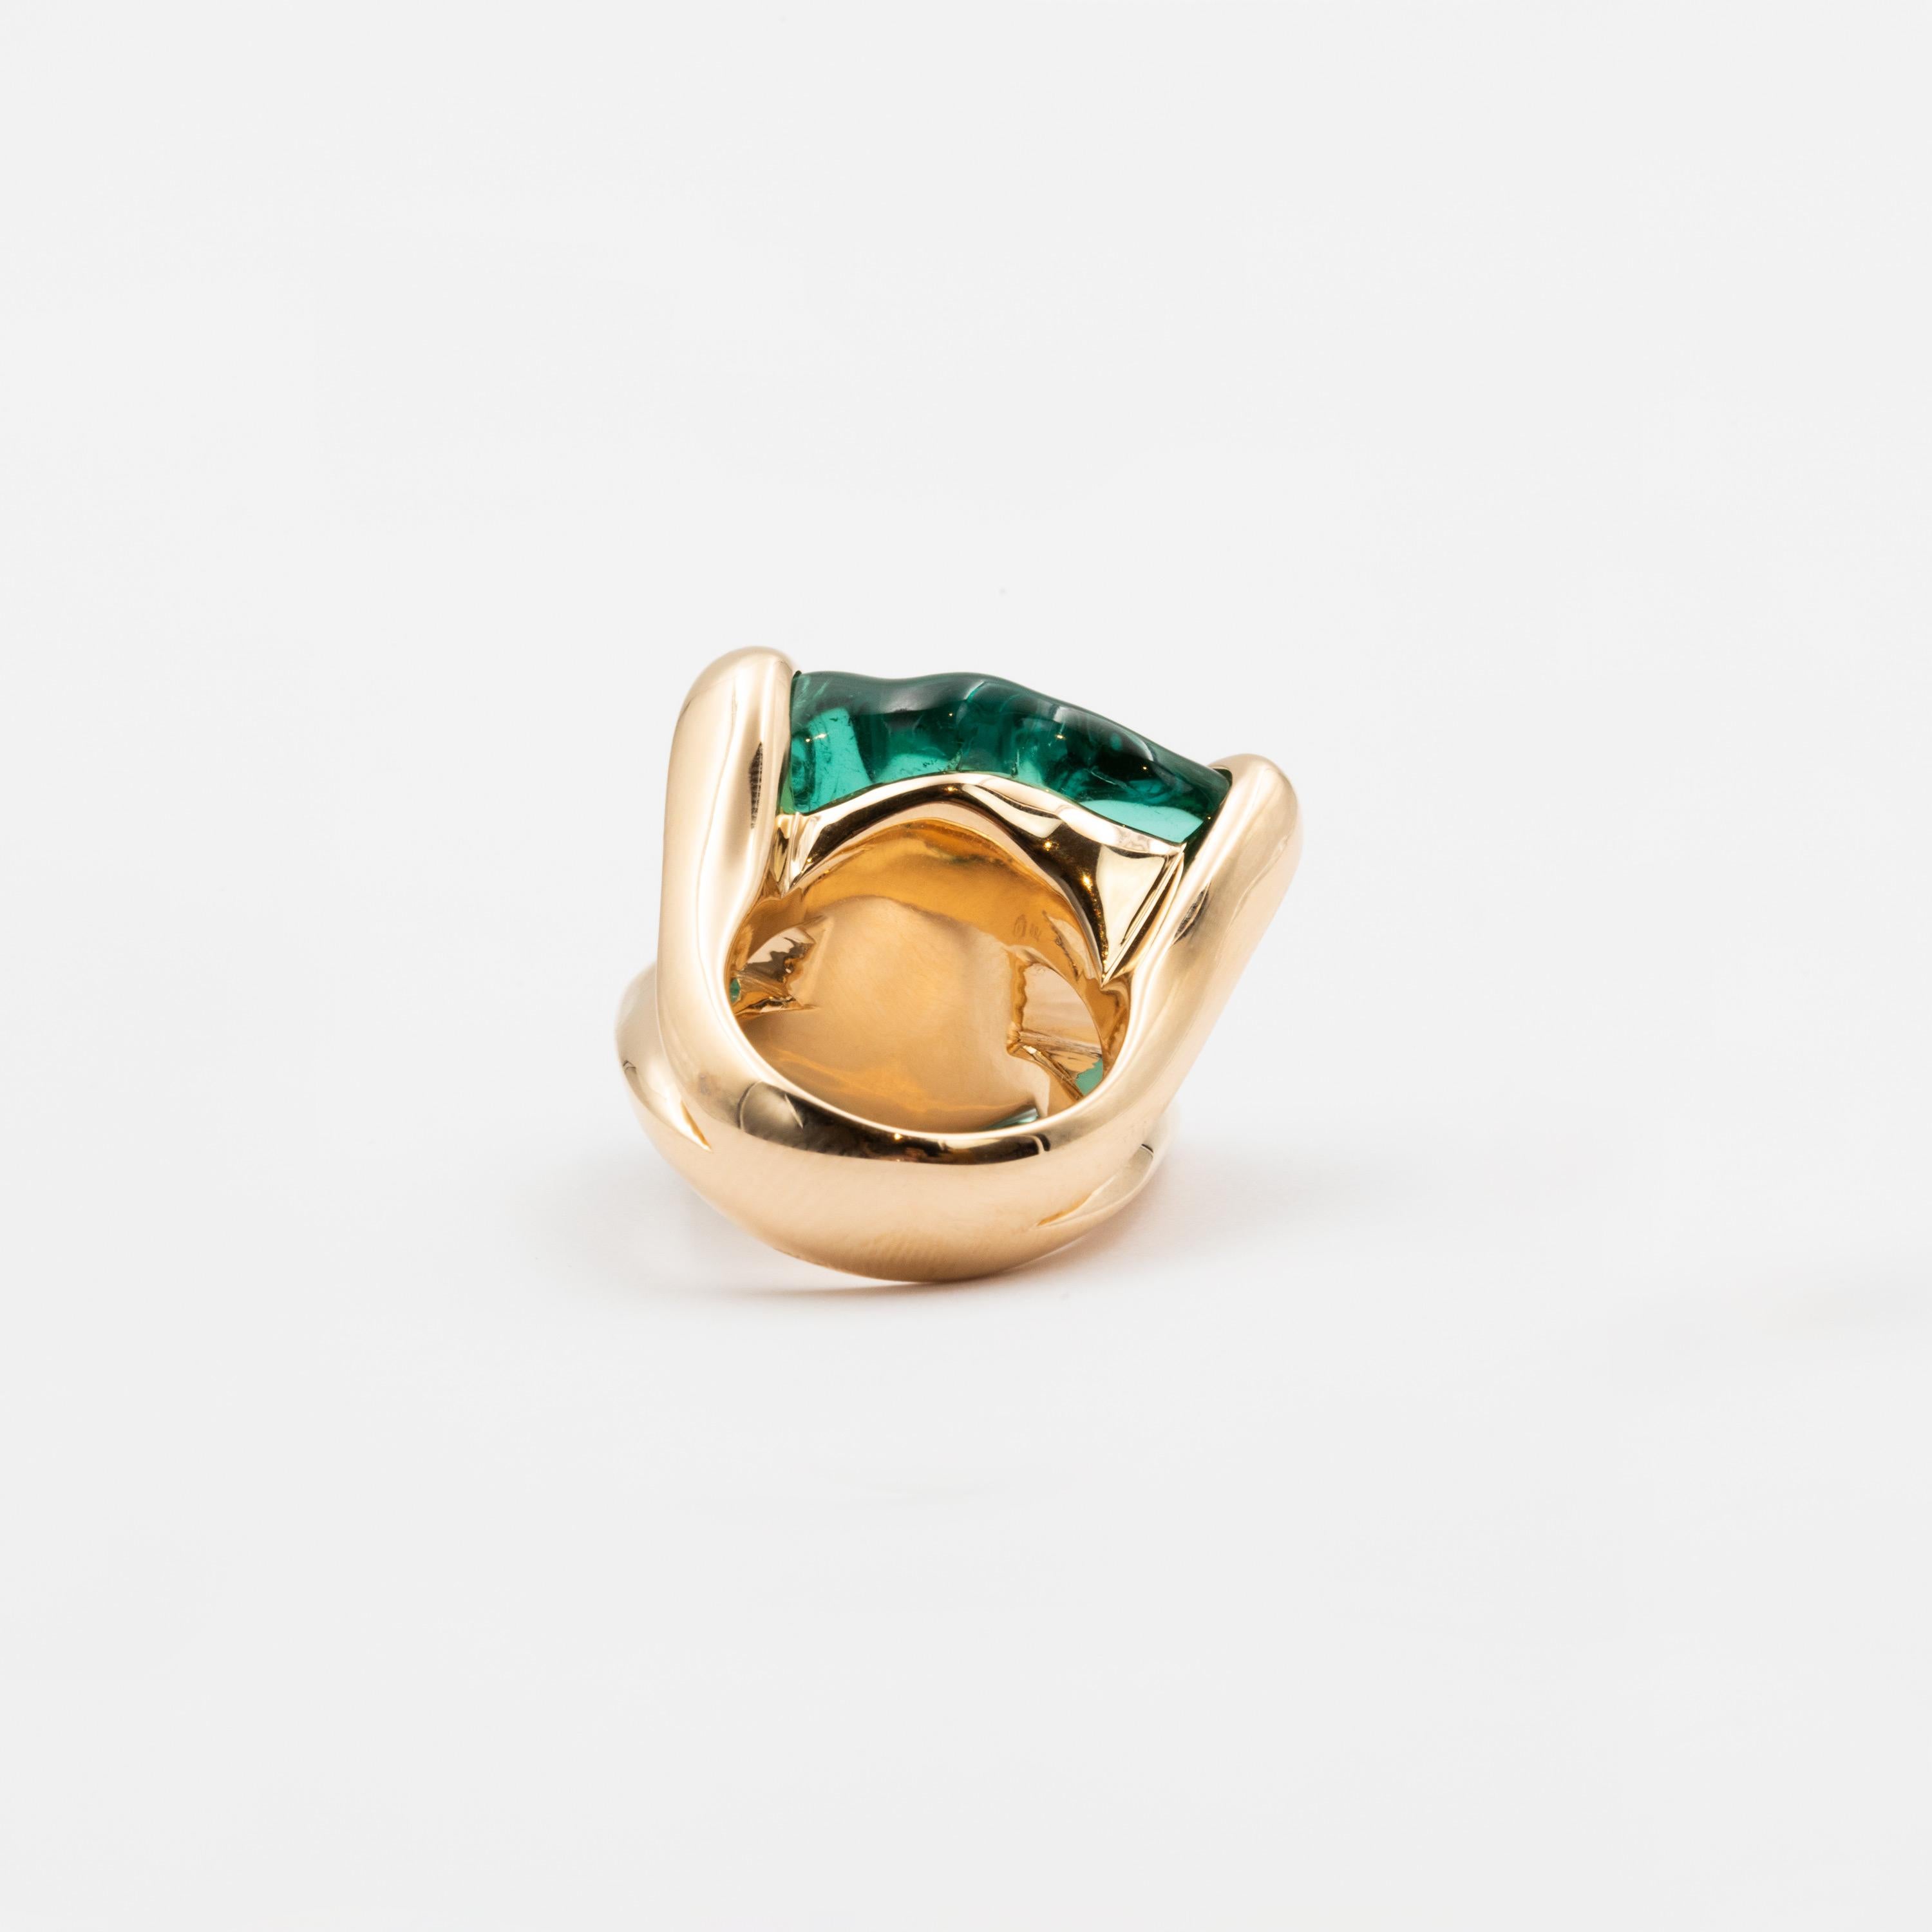 This 53.49 carat Tourmaline of an intense deep green color is the centerpiece of this extraordinary ring. The baroque-cut stone’s undulating shape reminds of vivid waves and catches the eye with its hypnotizing color. Imitating the precious